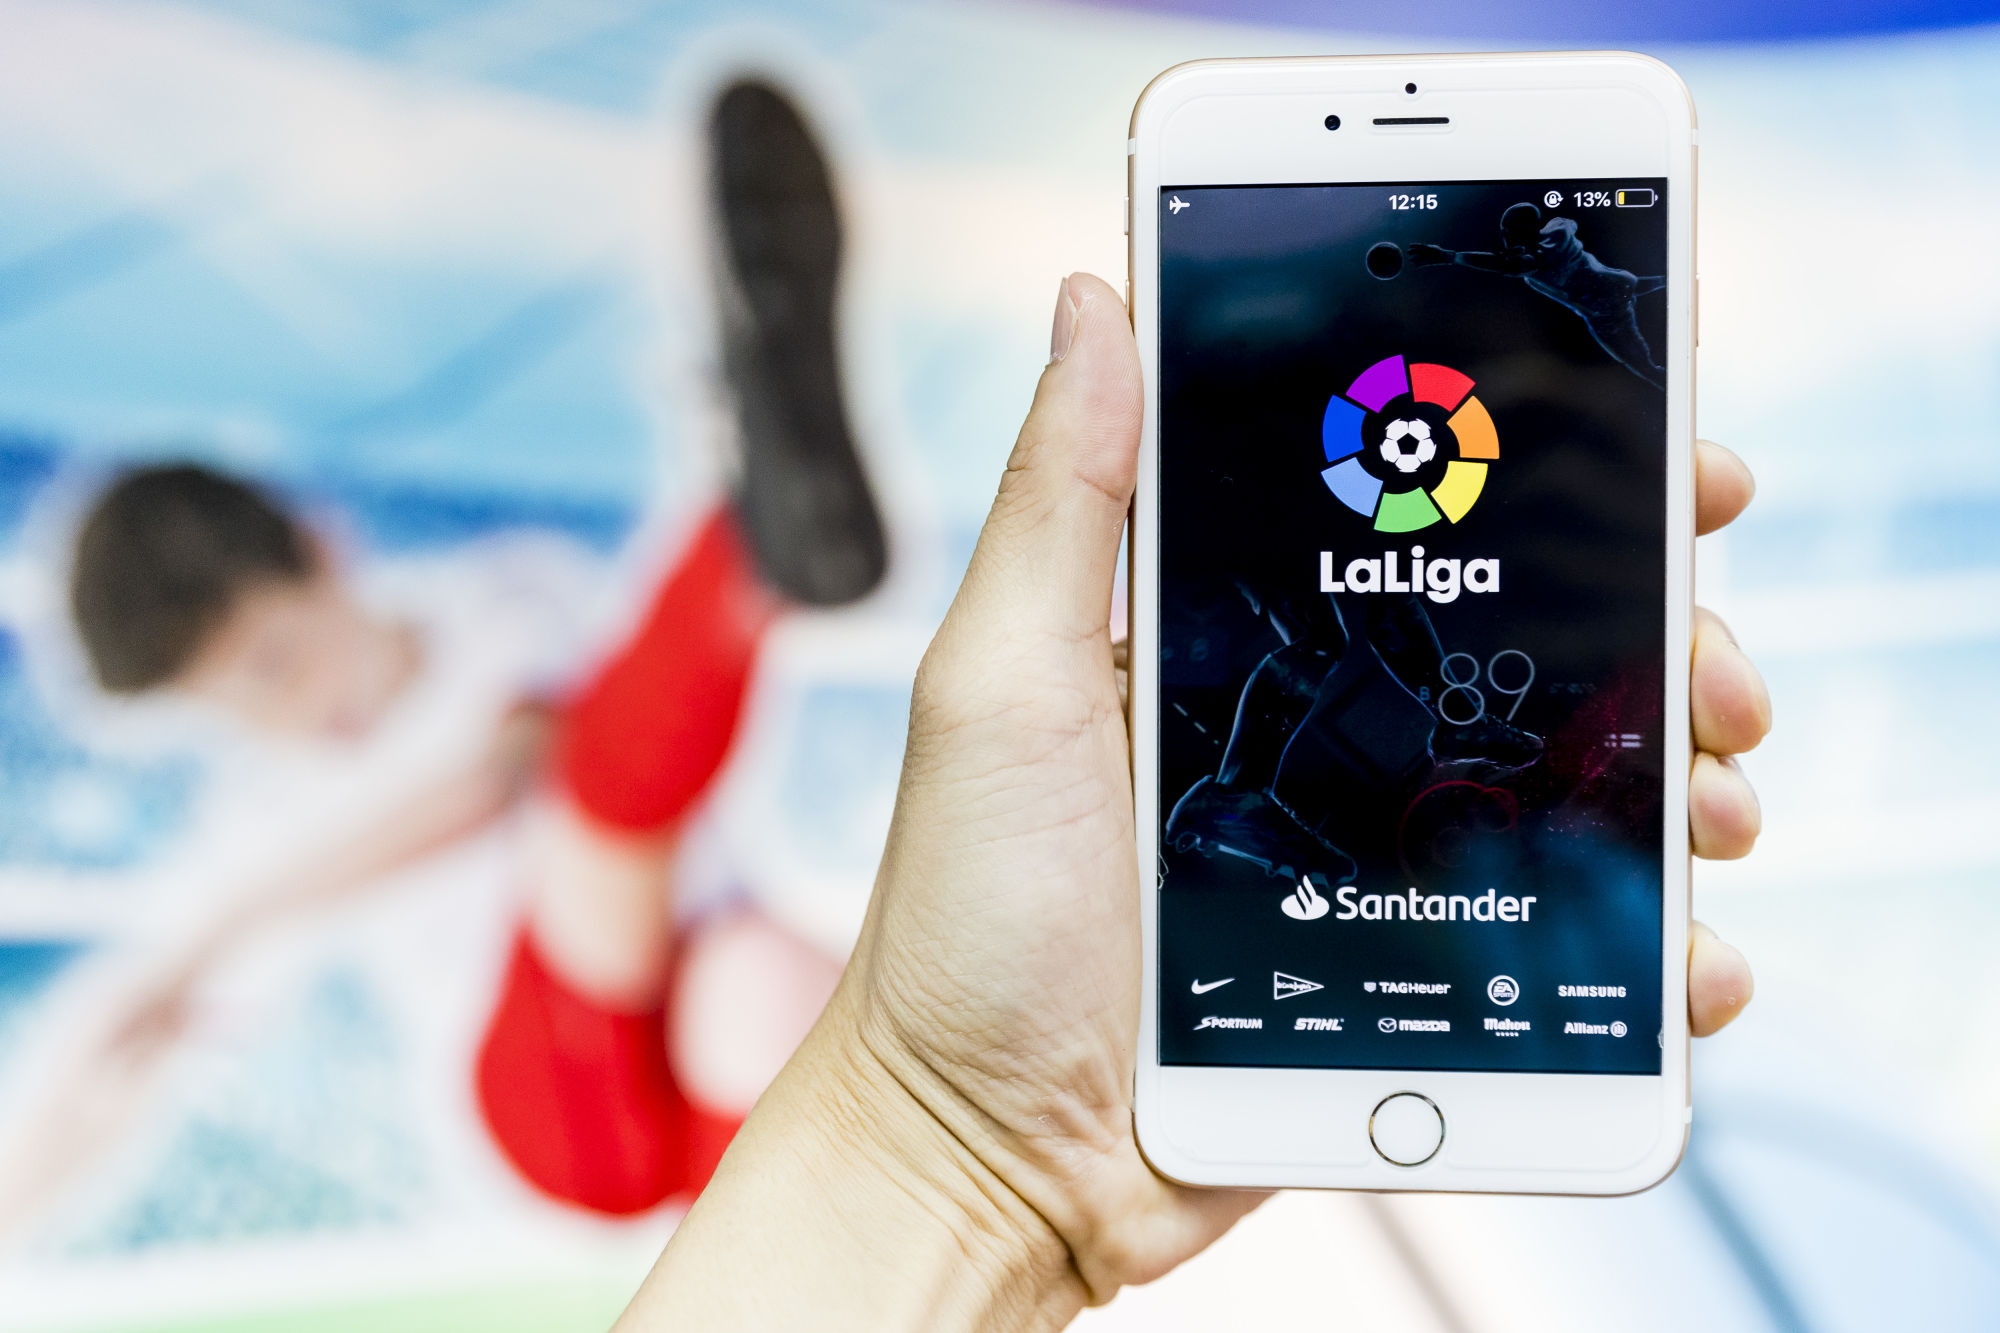 La Liga fined €250k for using its app to catch illegal soccer streams | DeviceDaily.com